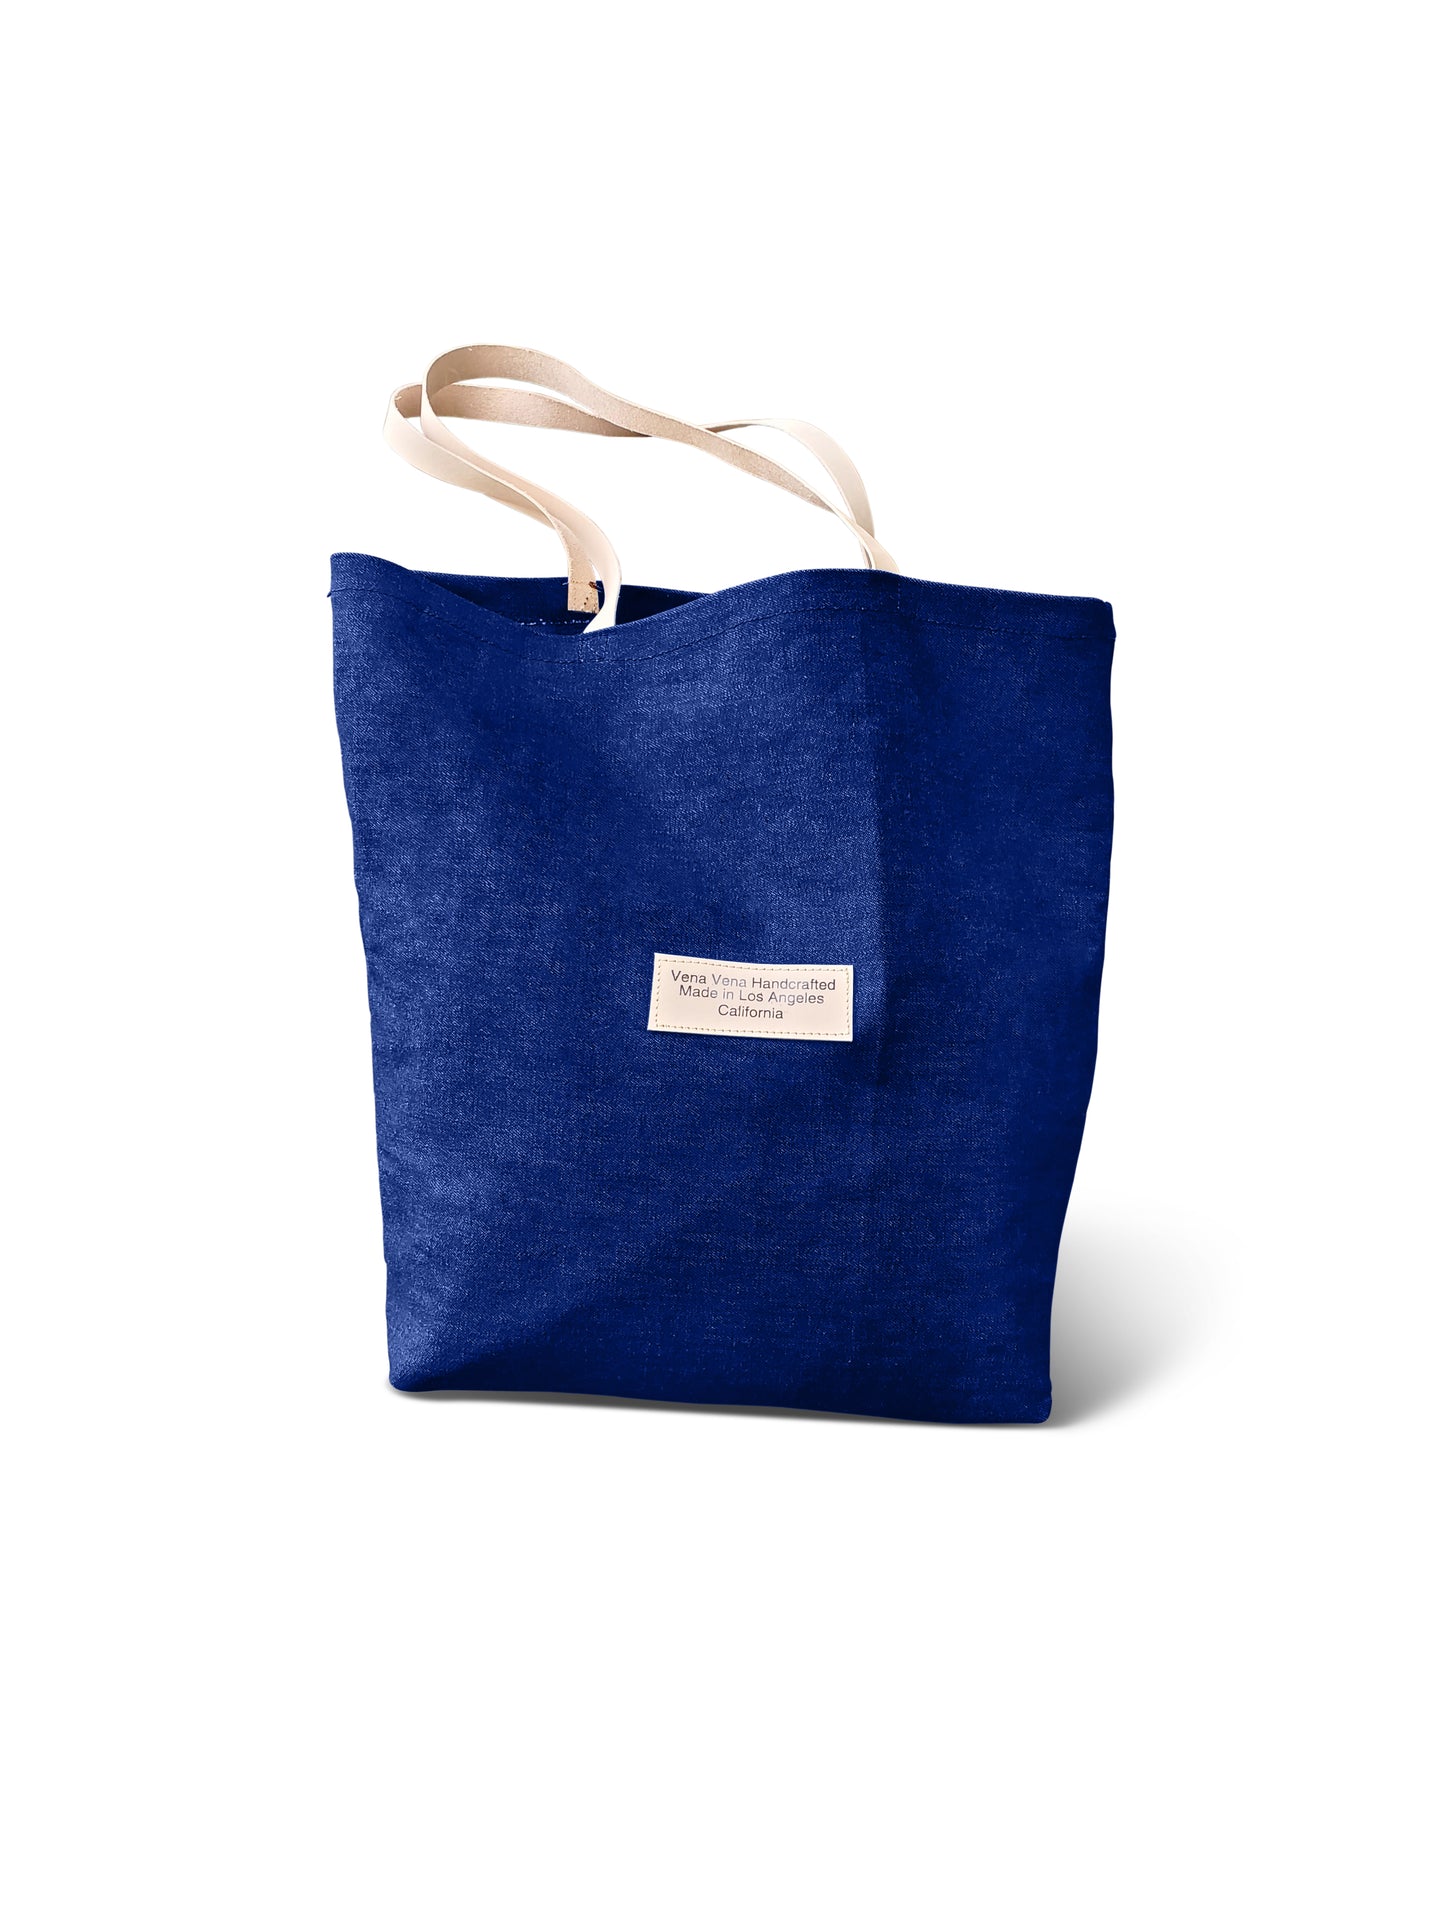 15 inch denim tote bag with natural leather straps & double inside pockets. Made in LA